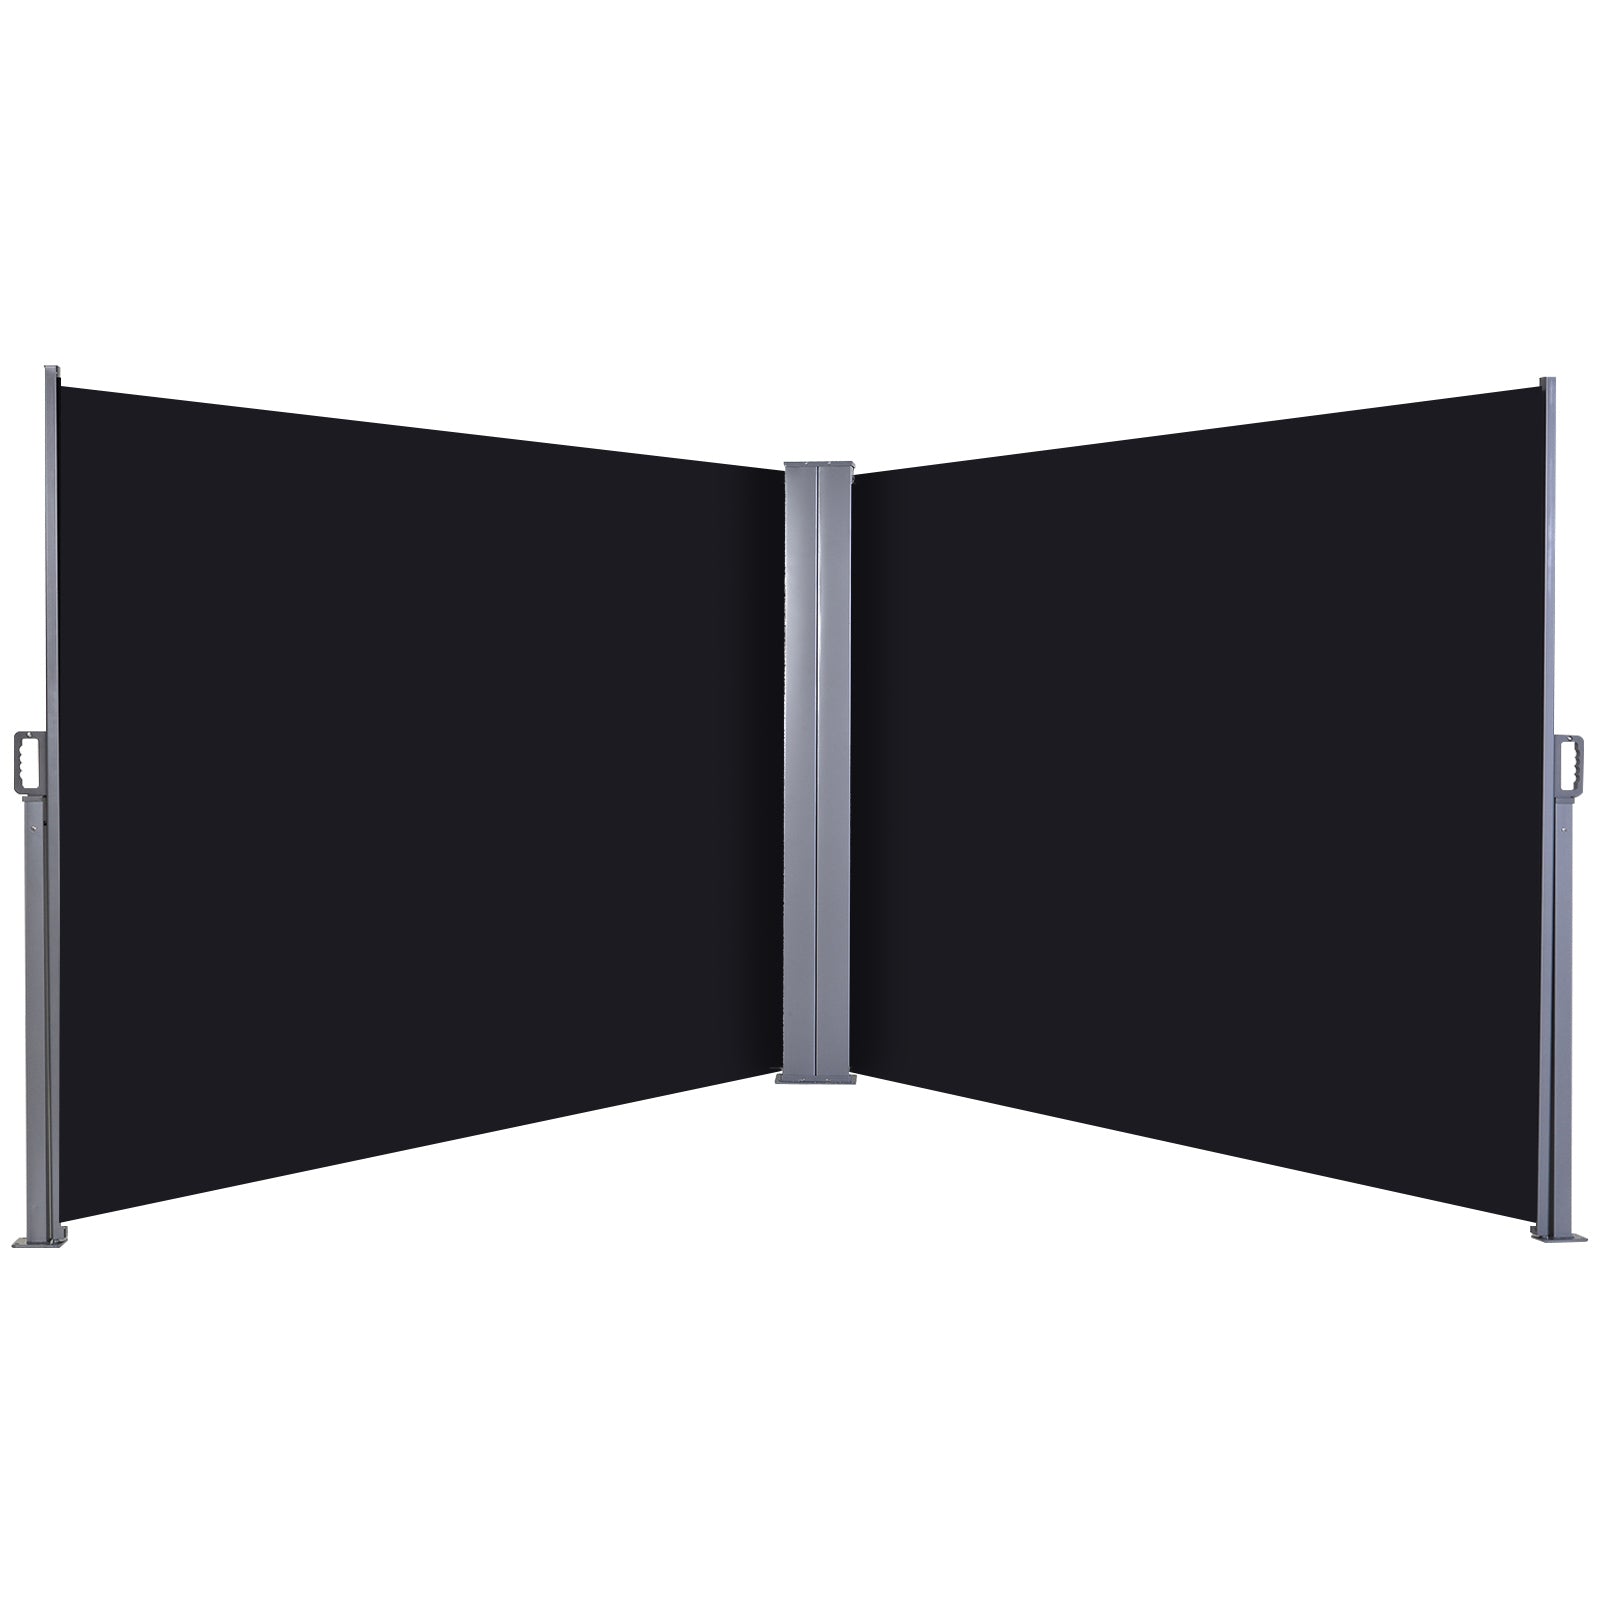 Outsunny Retractable Double Side Awning Screen Fence Privacy Black - 6x1.6m  | TJ Hughes